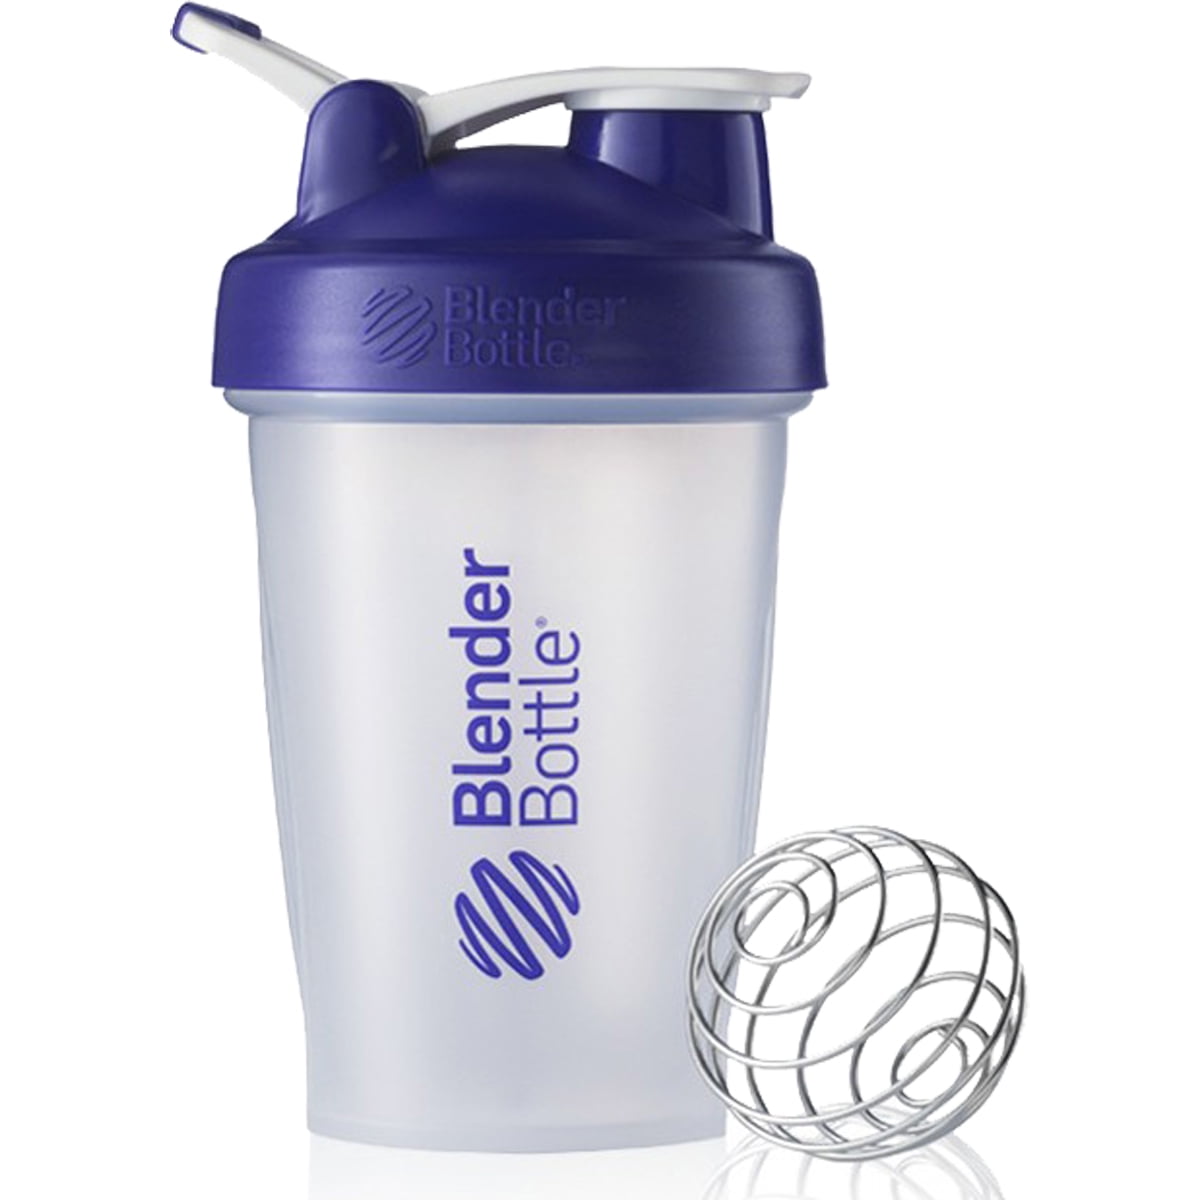 Oats Overnight BlenderBottle - Customized for Overnight Oats - NO Whisk  Ball - Milk Fill Line - Clear/White/Green - 20-Ounce Loop Top